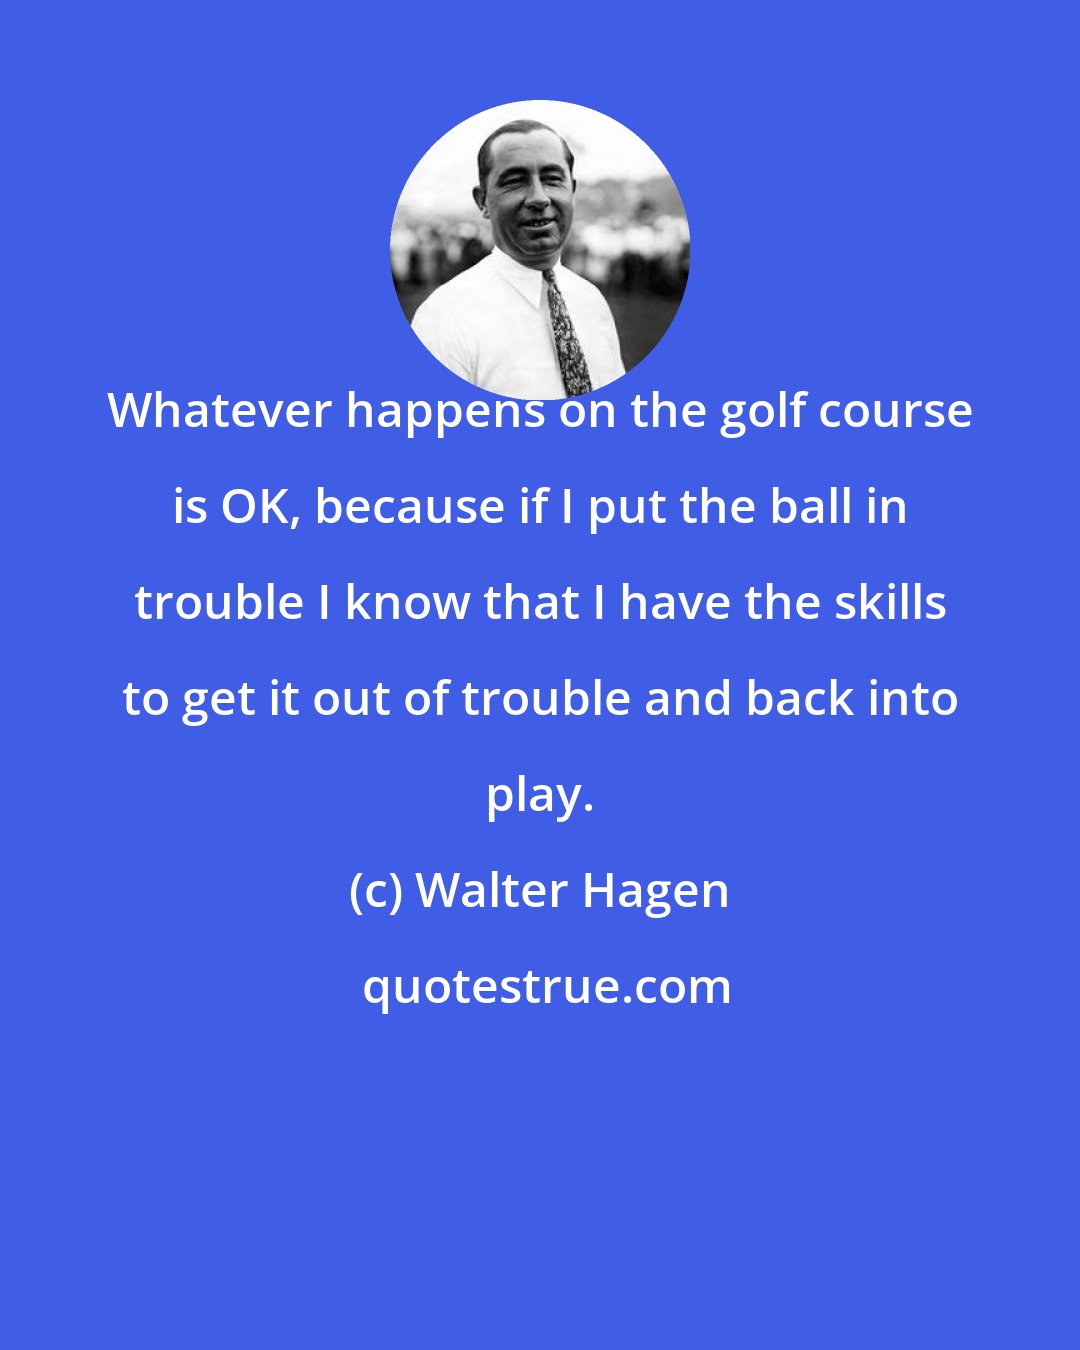 Walter Hagen: Whatever happens on the golf course is OK, because if I put the ball in trouble I know that I have the skills to get it out of trouble and back into play.